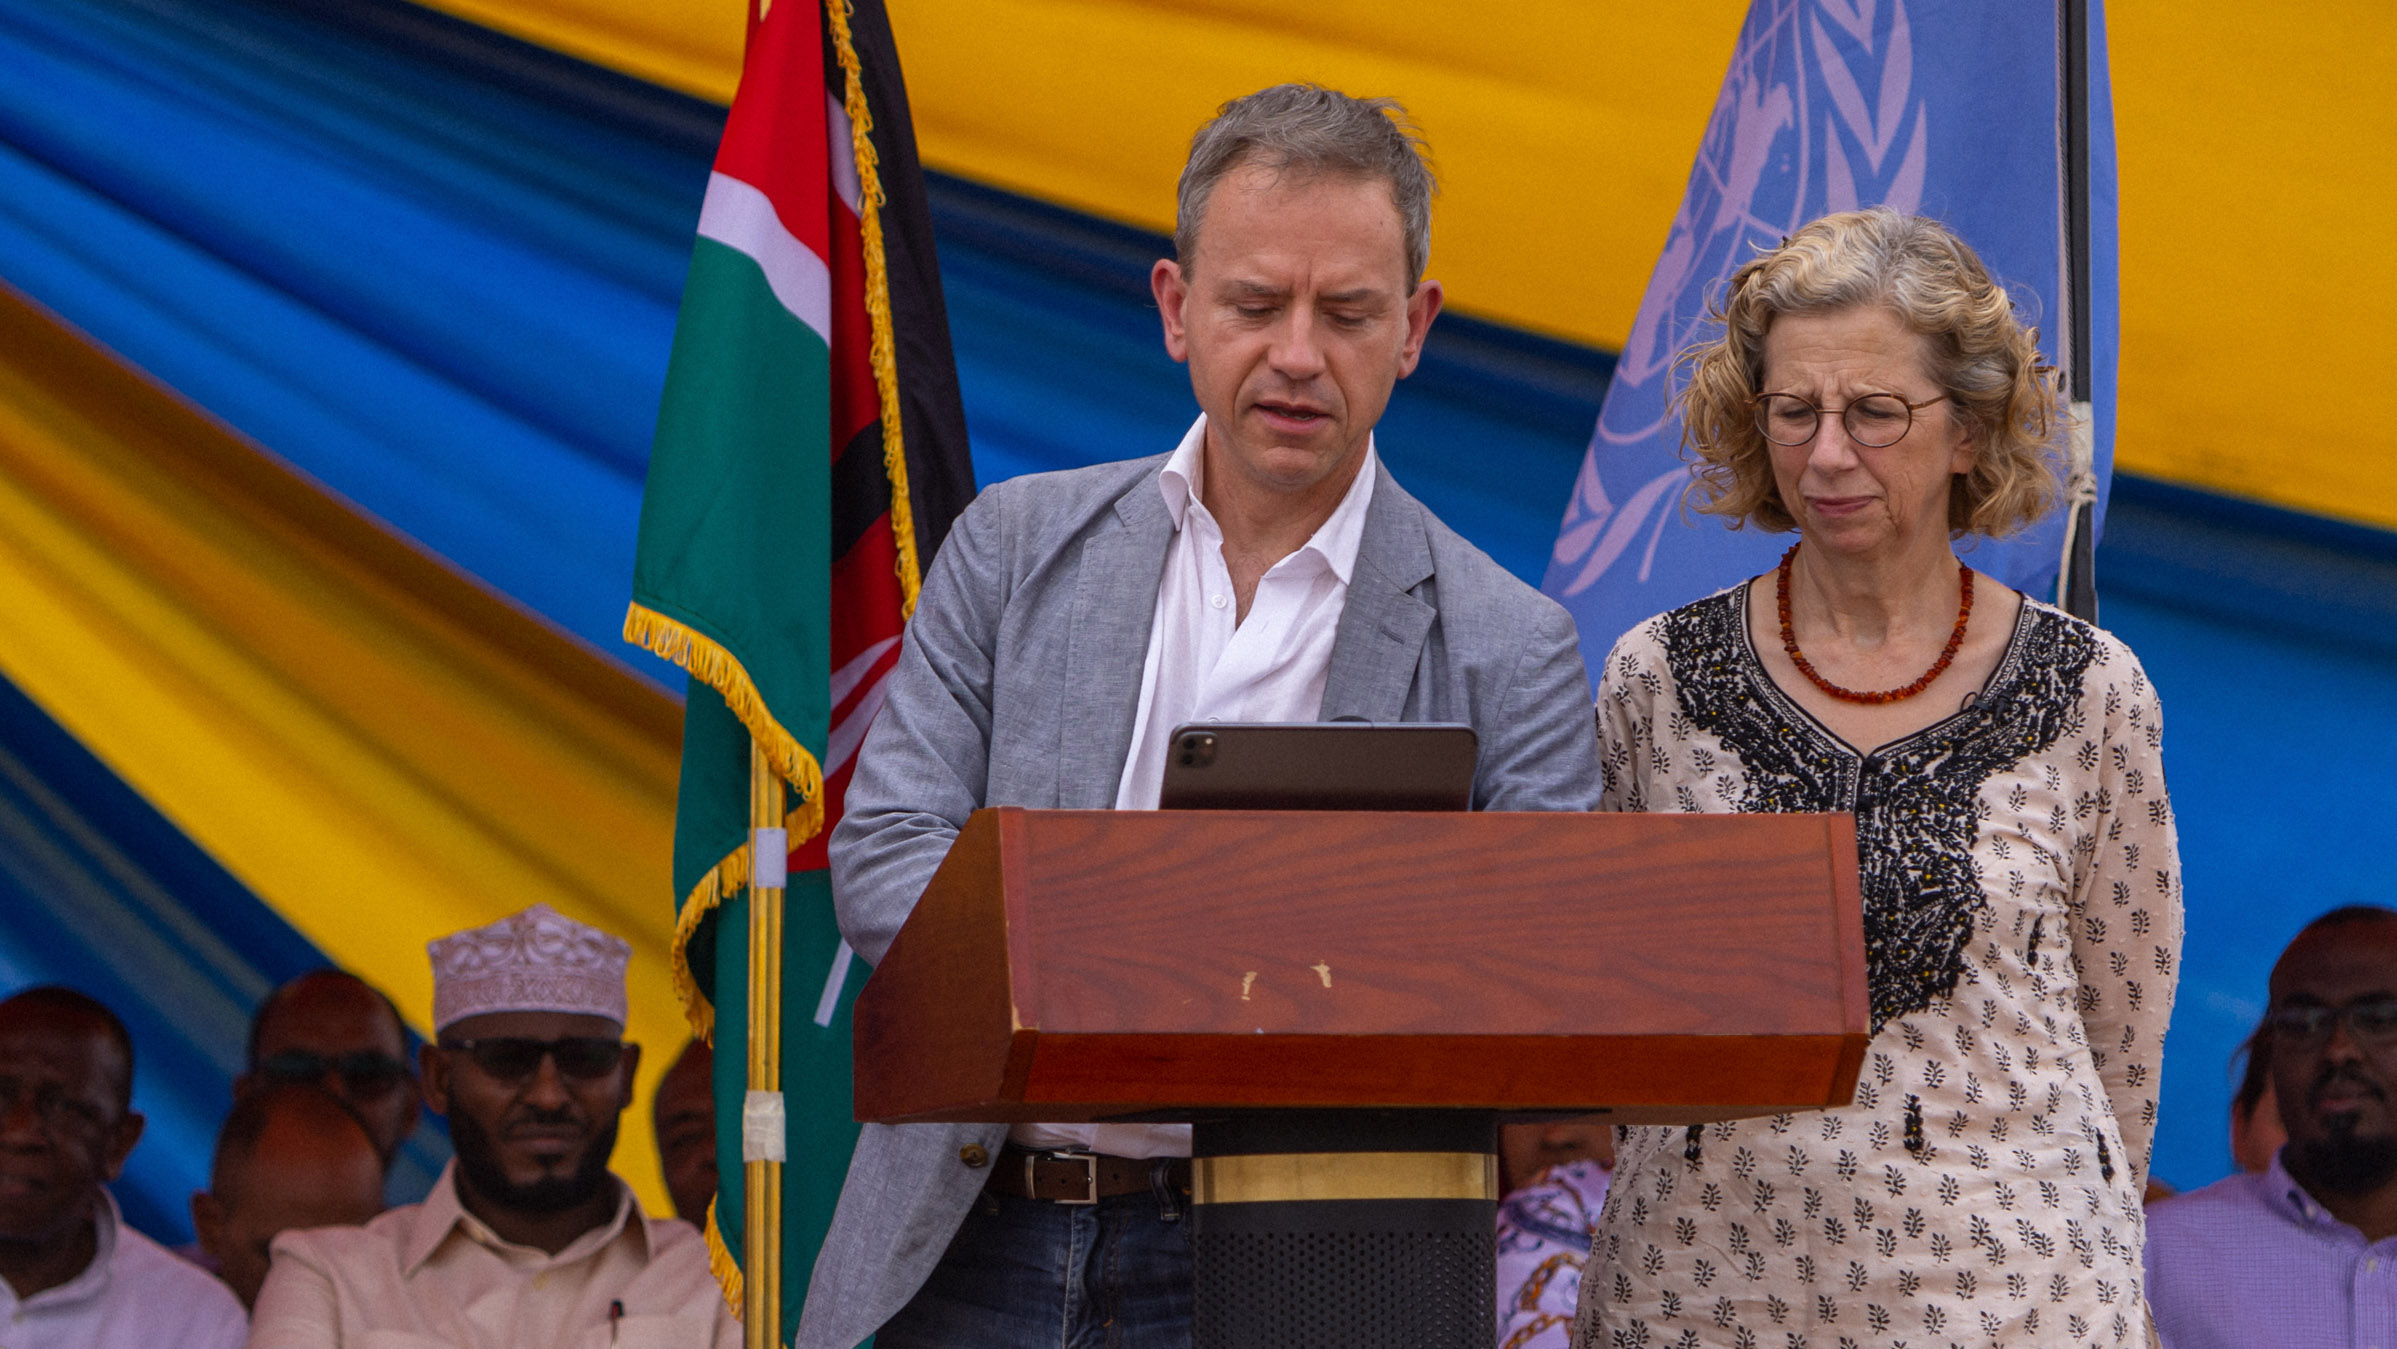 Stephen and UNEP Executive Director Inger Andersen speaking at a podium.